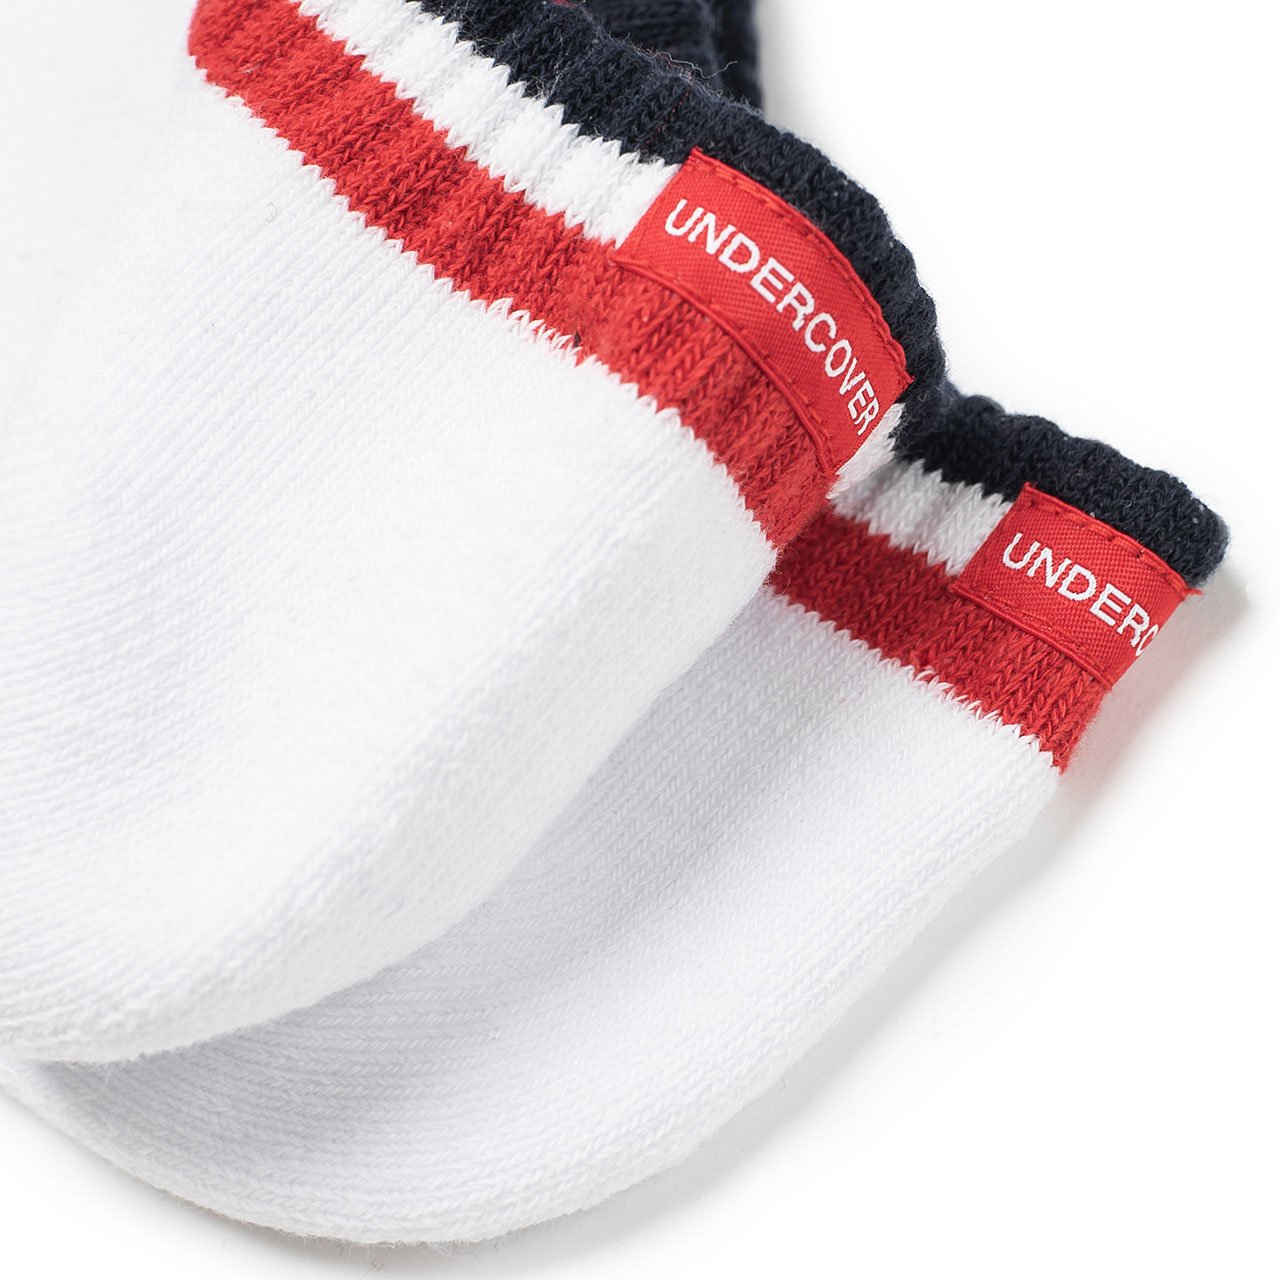 undercover undercover ankle socks (white / multi) UCY4L03-wht